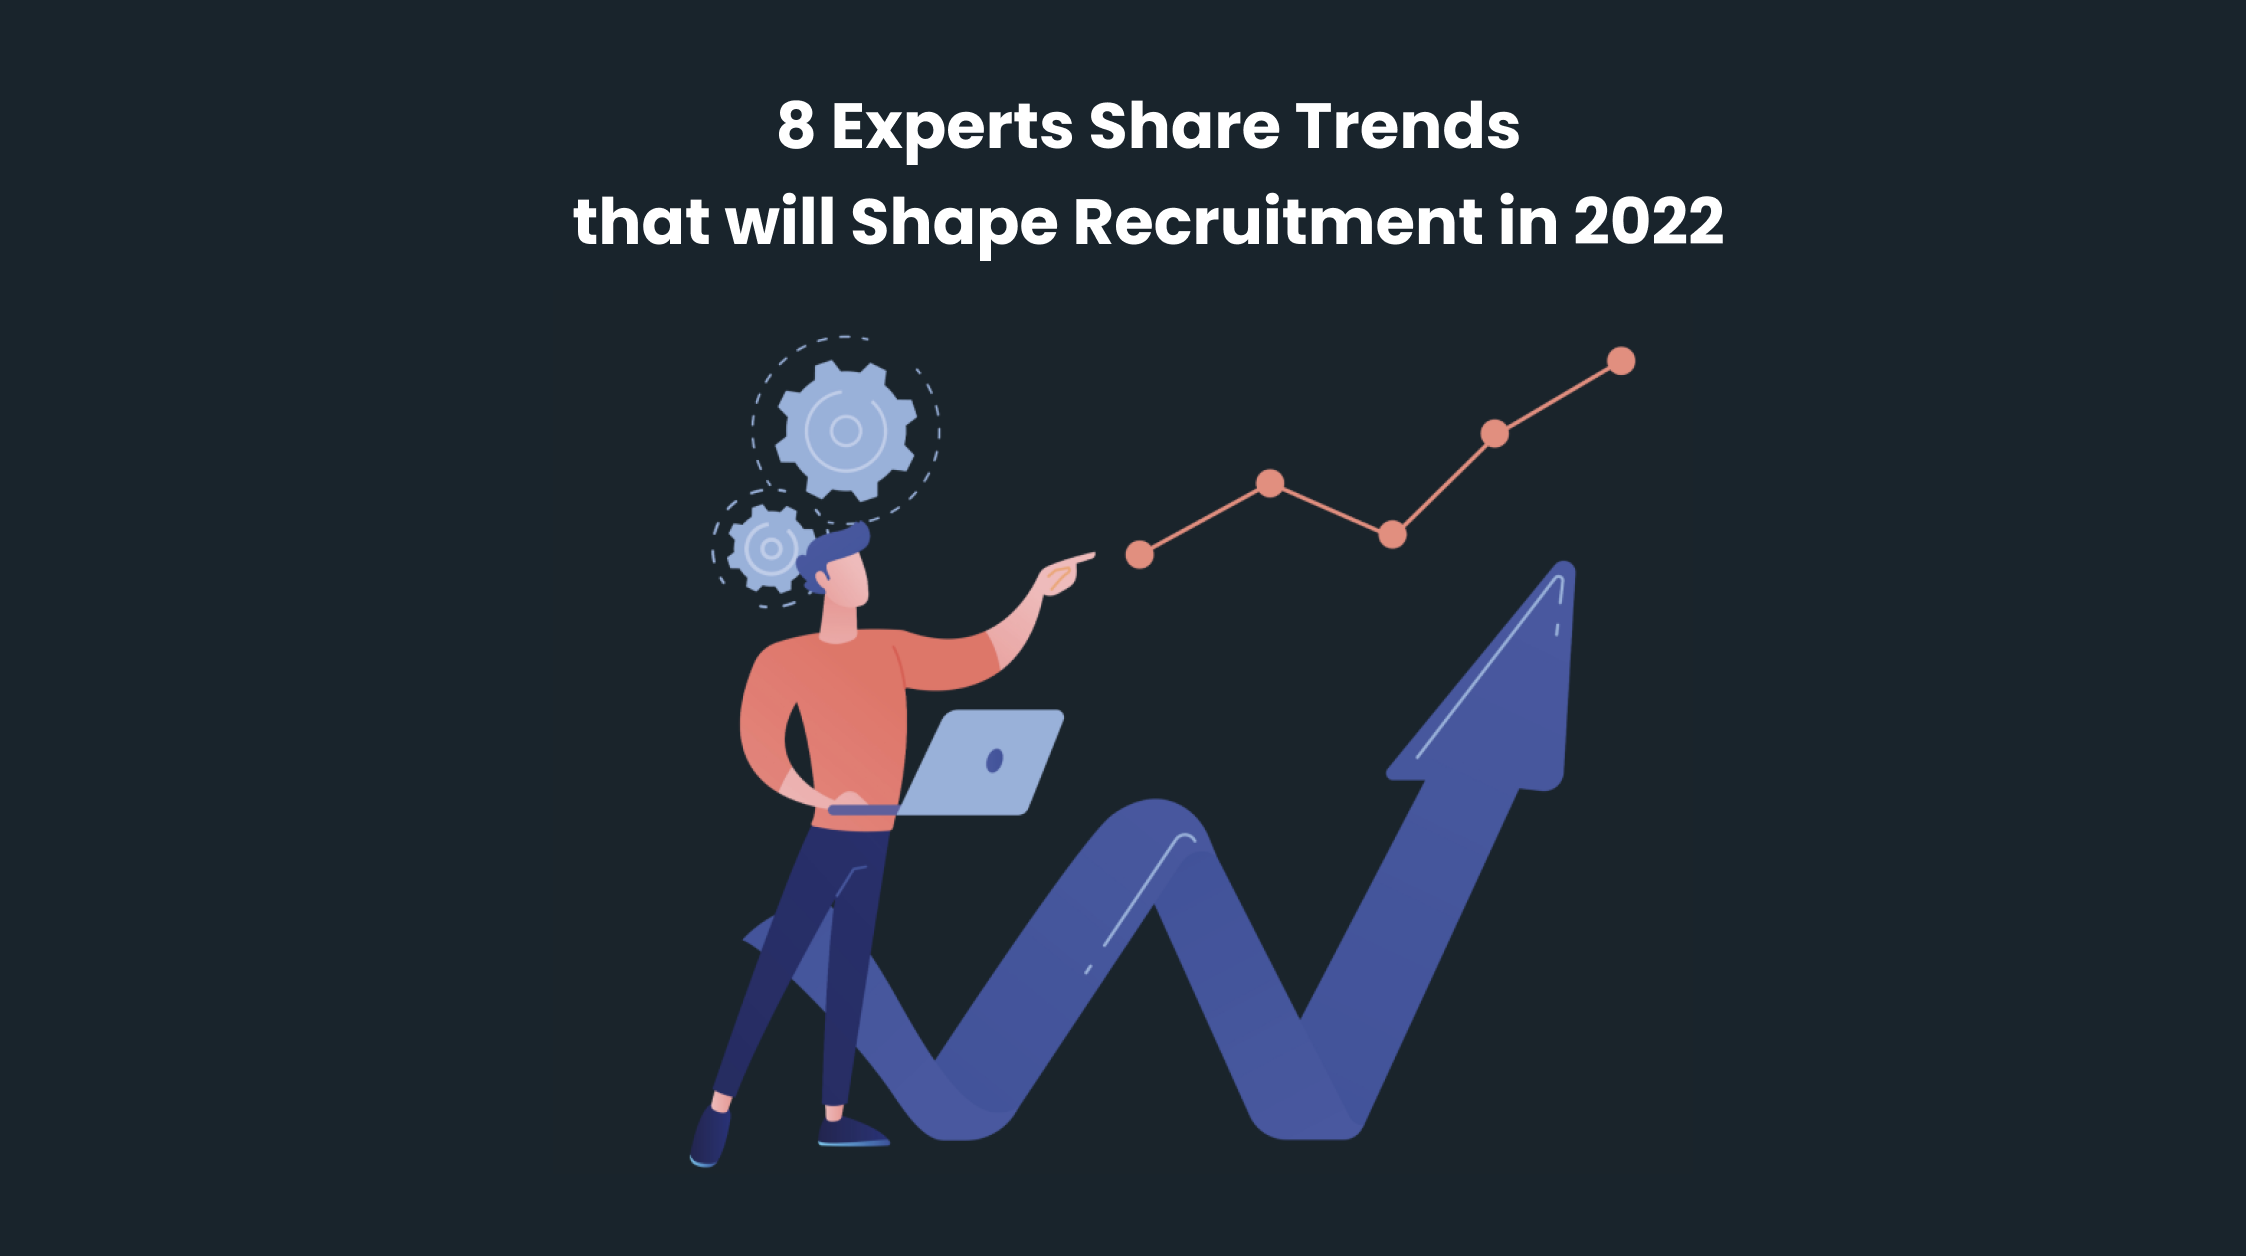 8 Experts Share Trends that will Shape Recruitment in 2022